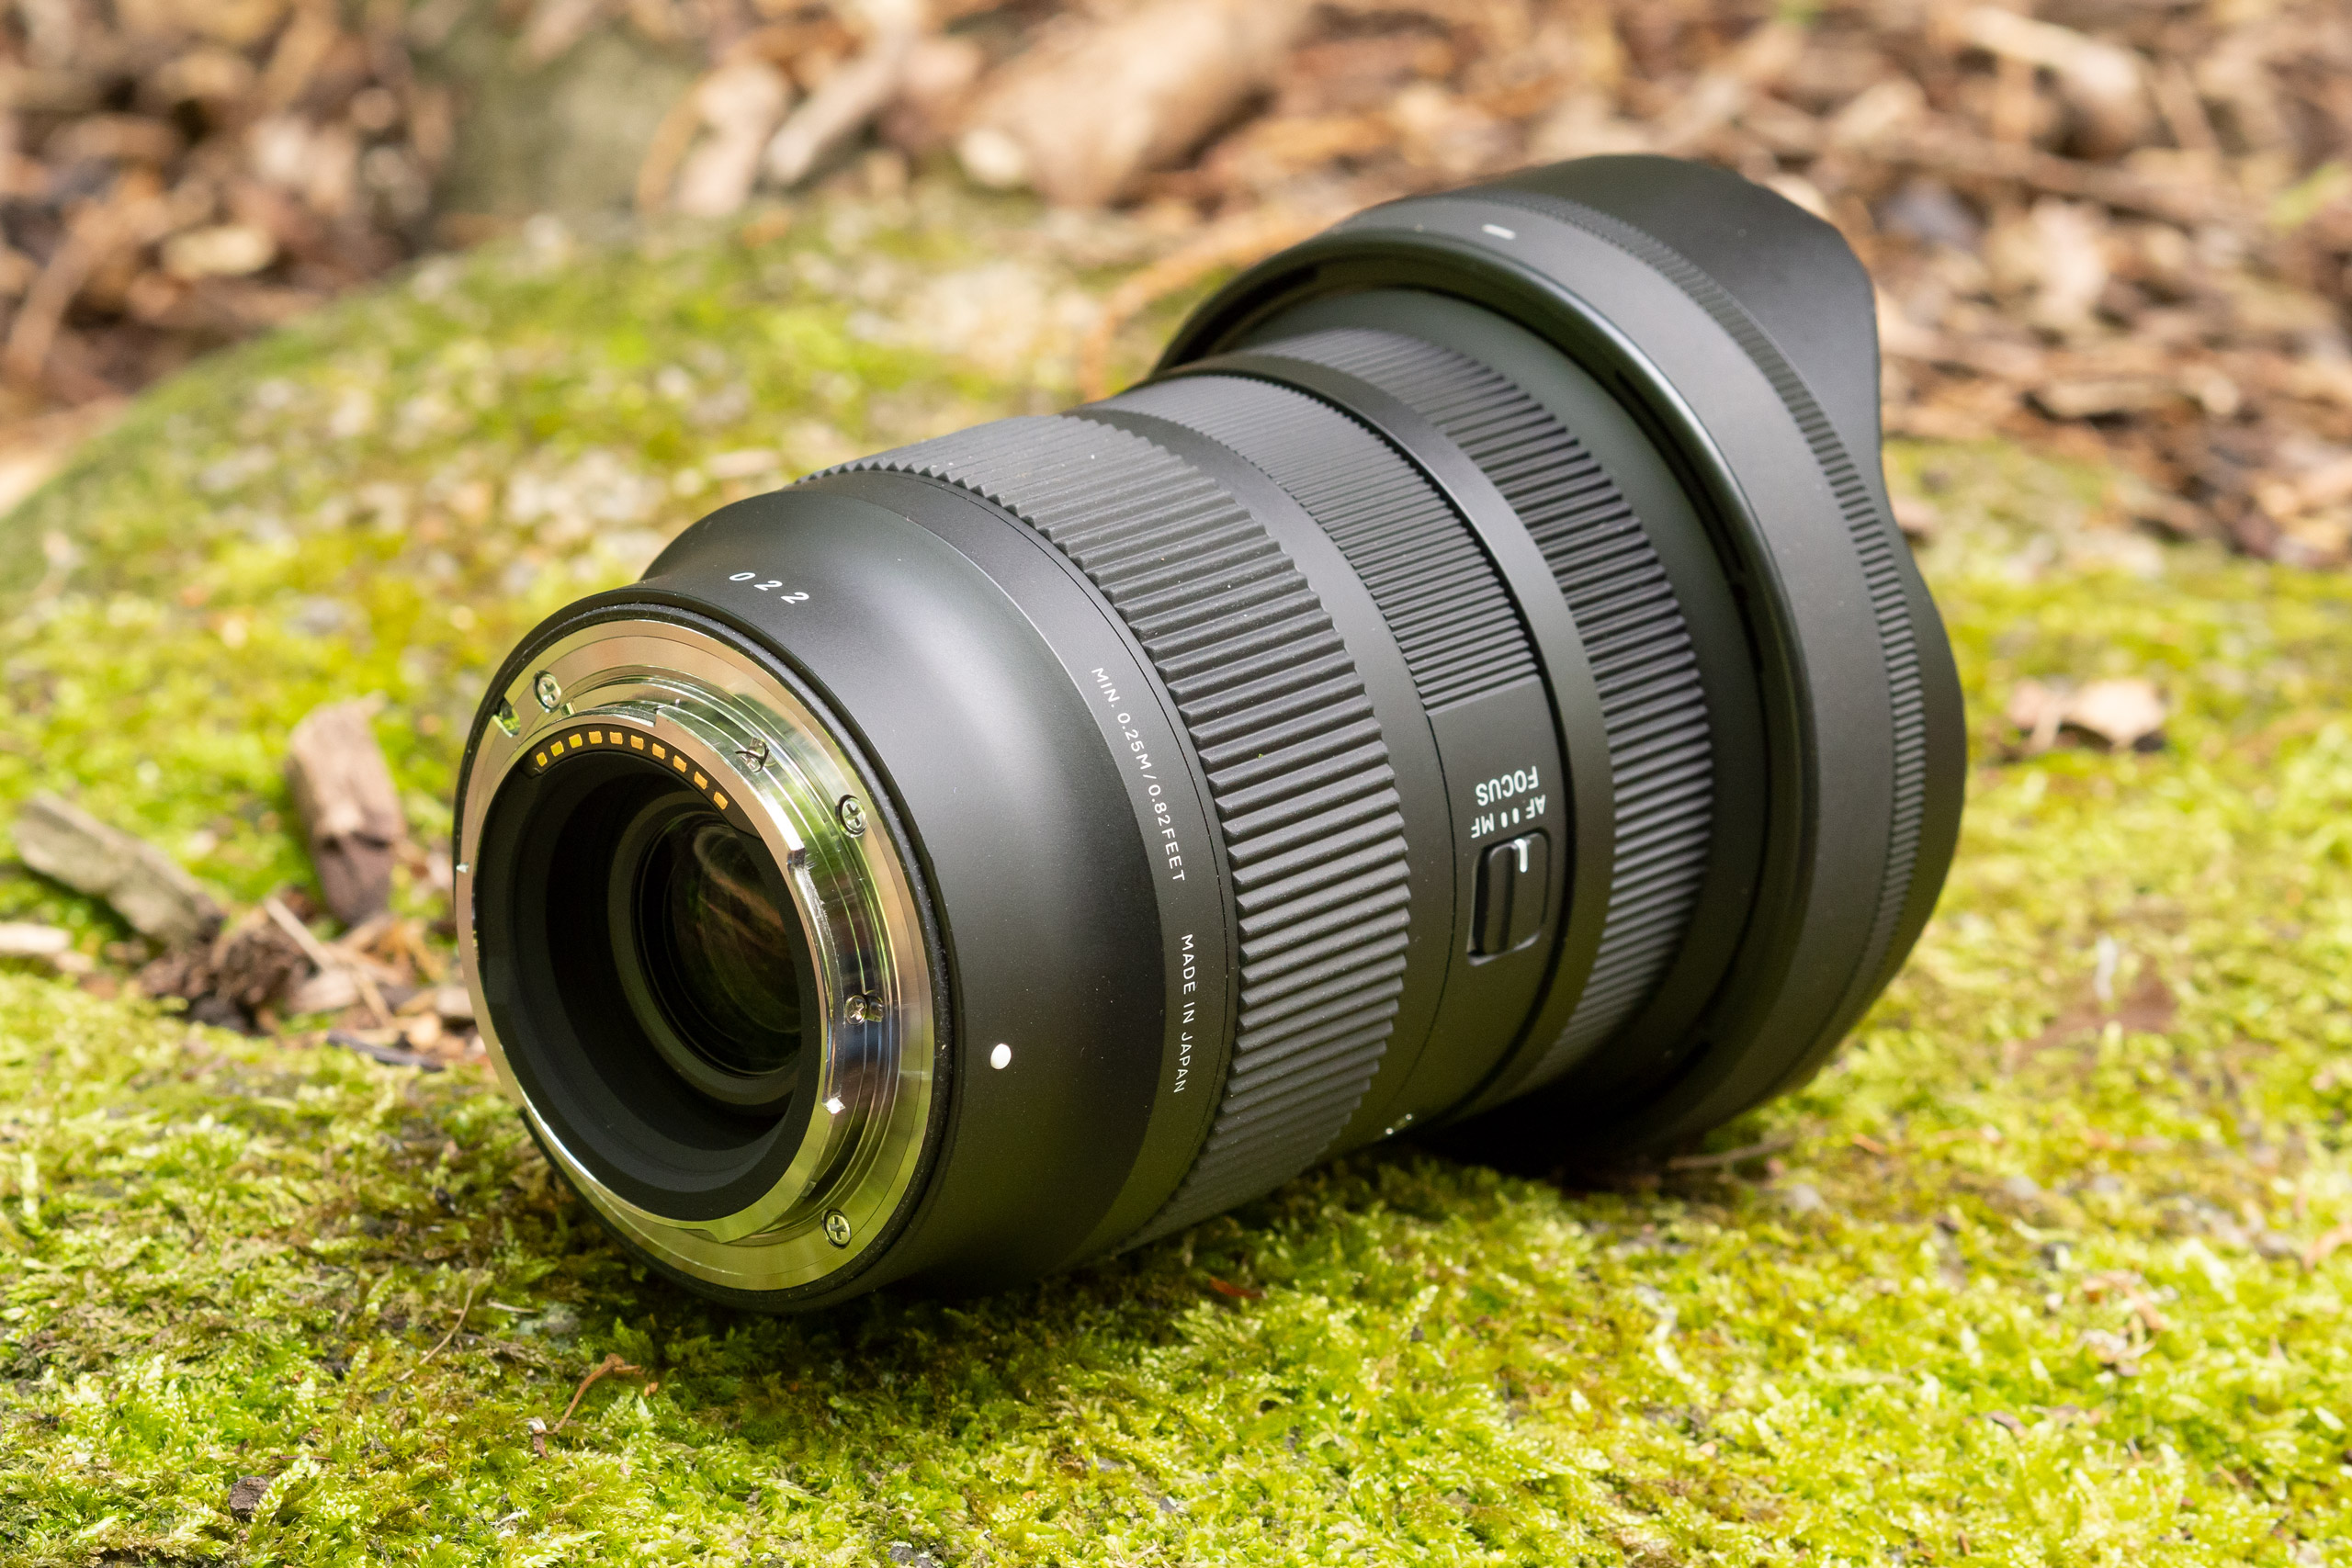 The Sigma 16-28mm F2.8 DG DN C lens from the rear